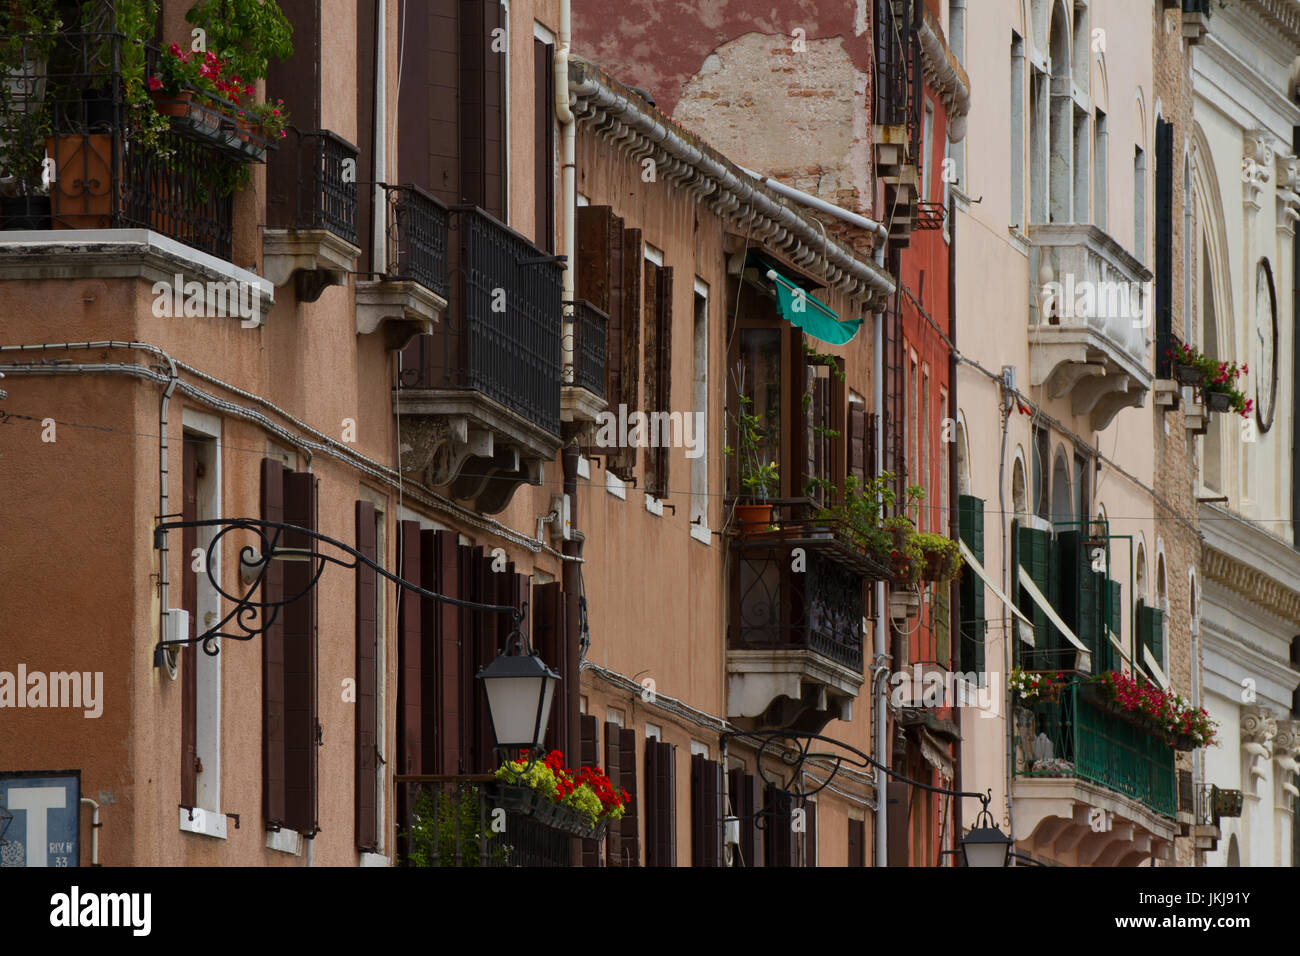 Colourful frontages of buildings. venice. Italy Stock Photo